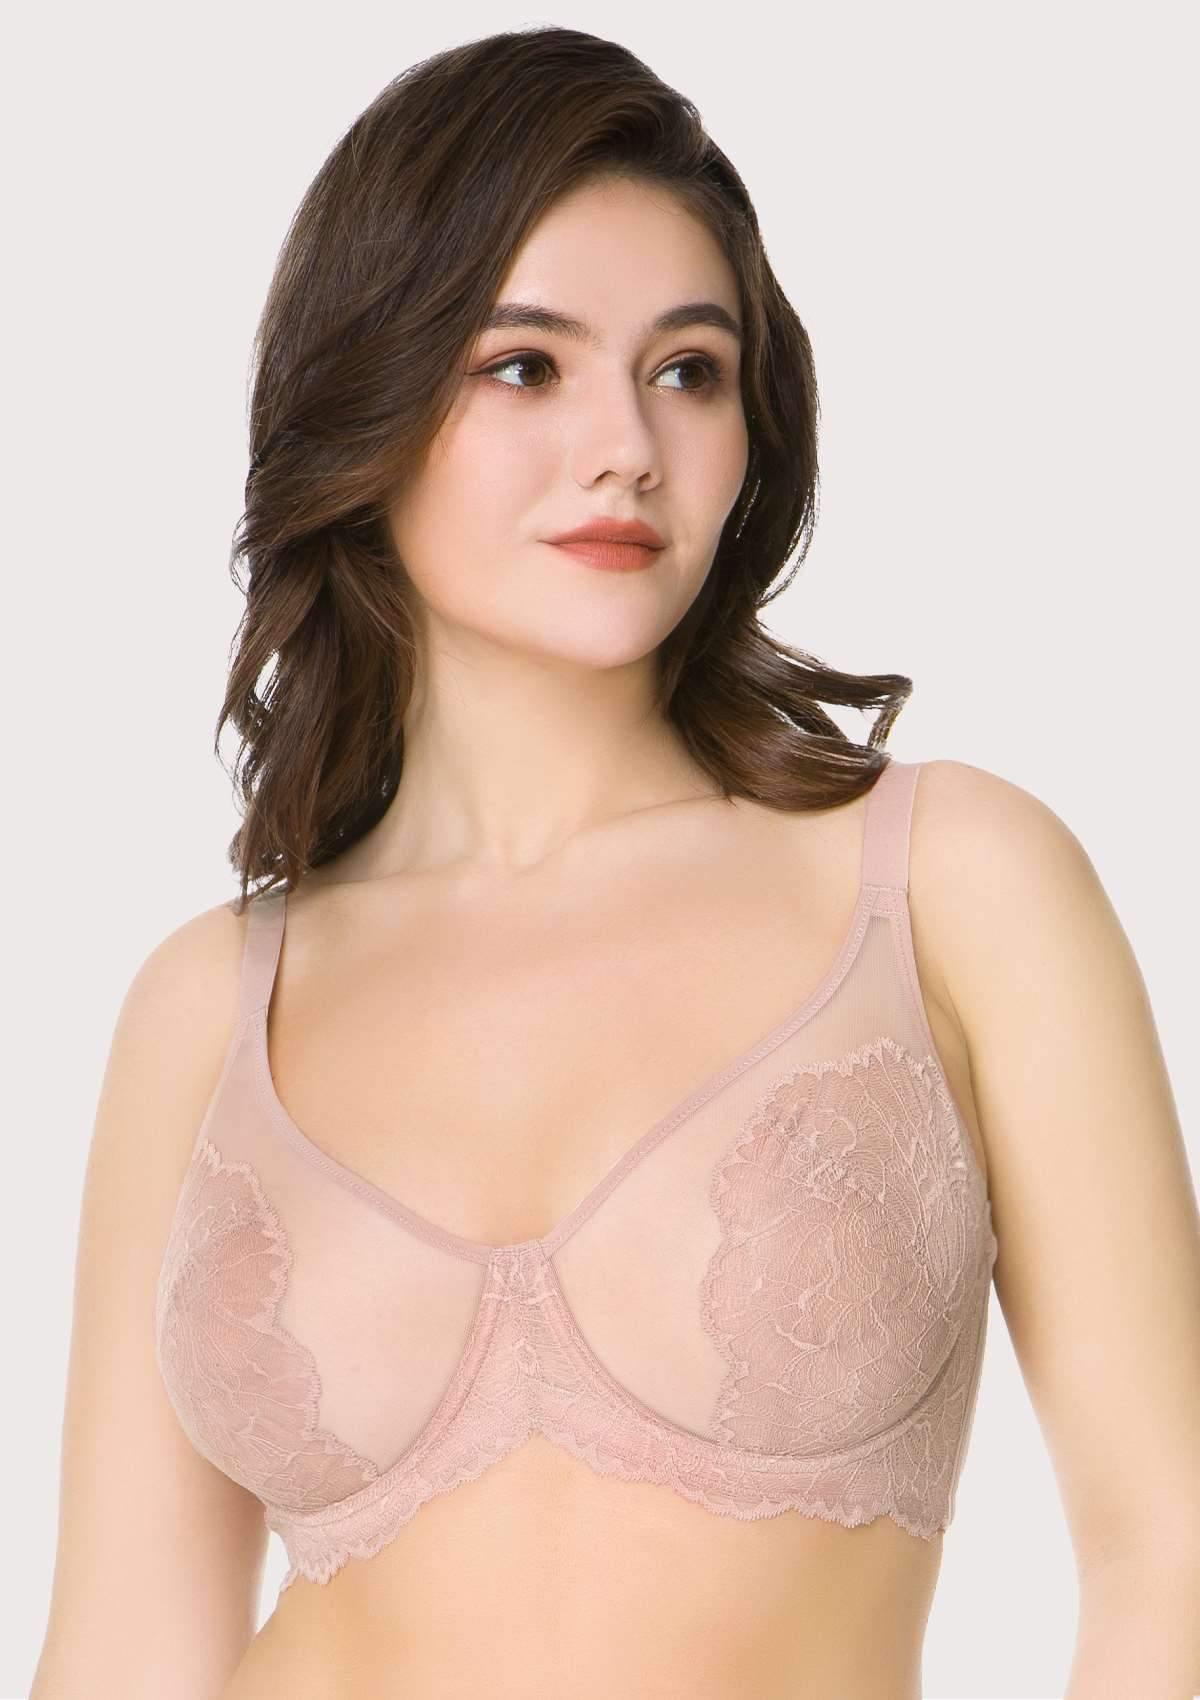 HSIA Blossom Lace Bra And Panties Set: Best Bra For Large Busts - Dark Pink / 46 / C